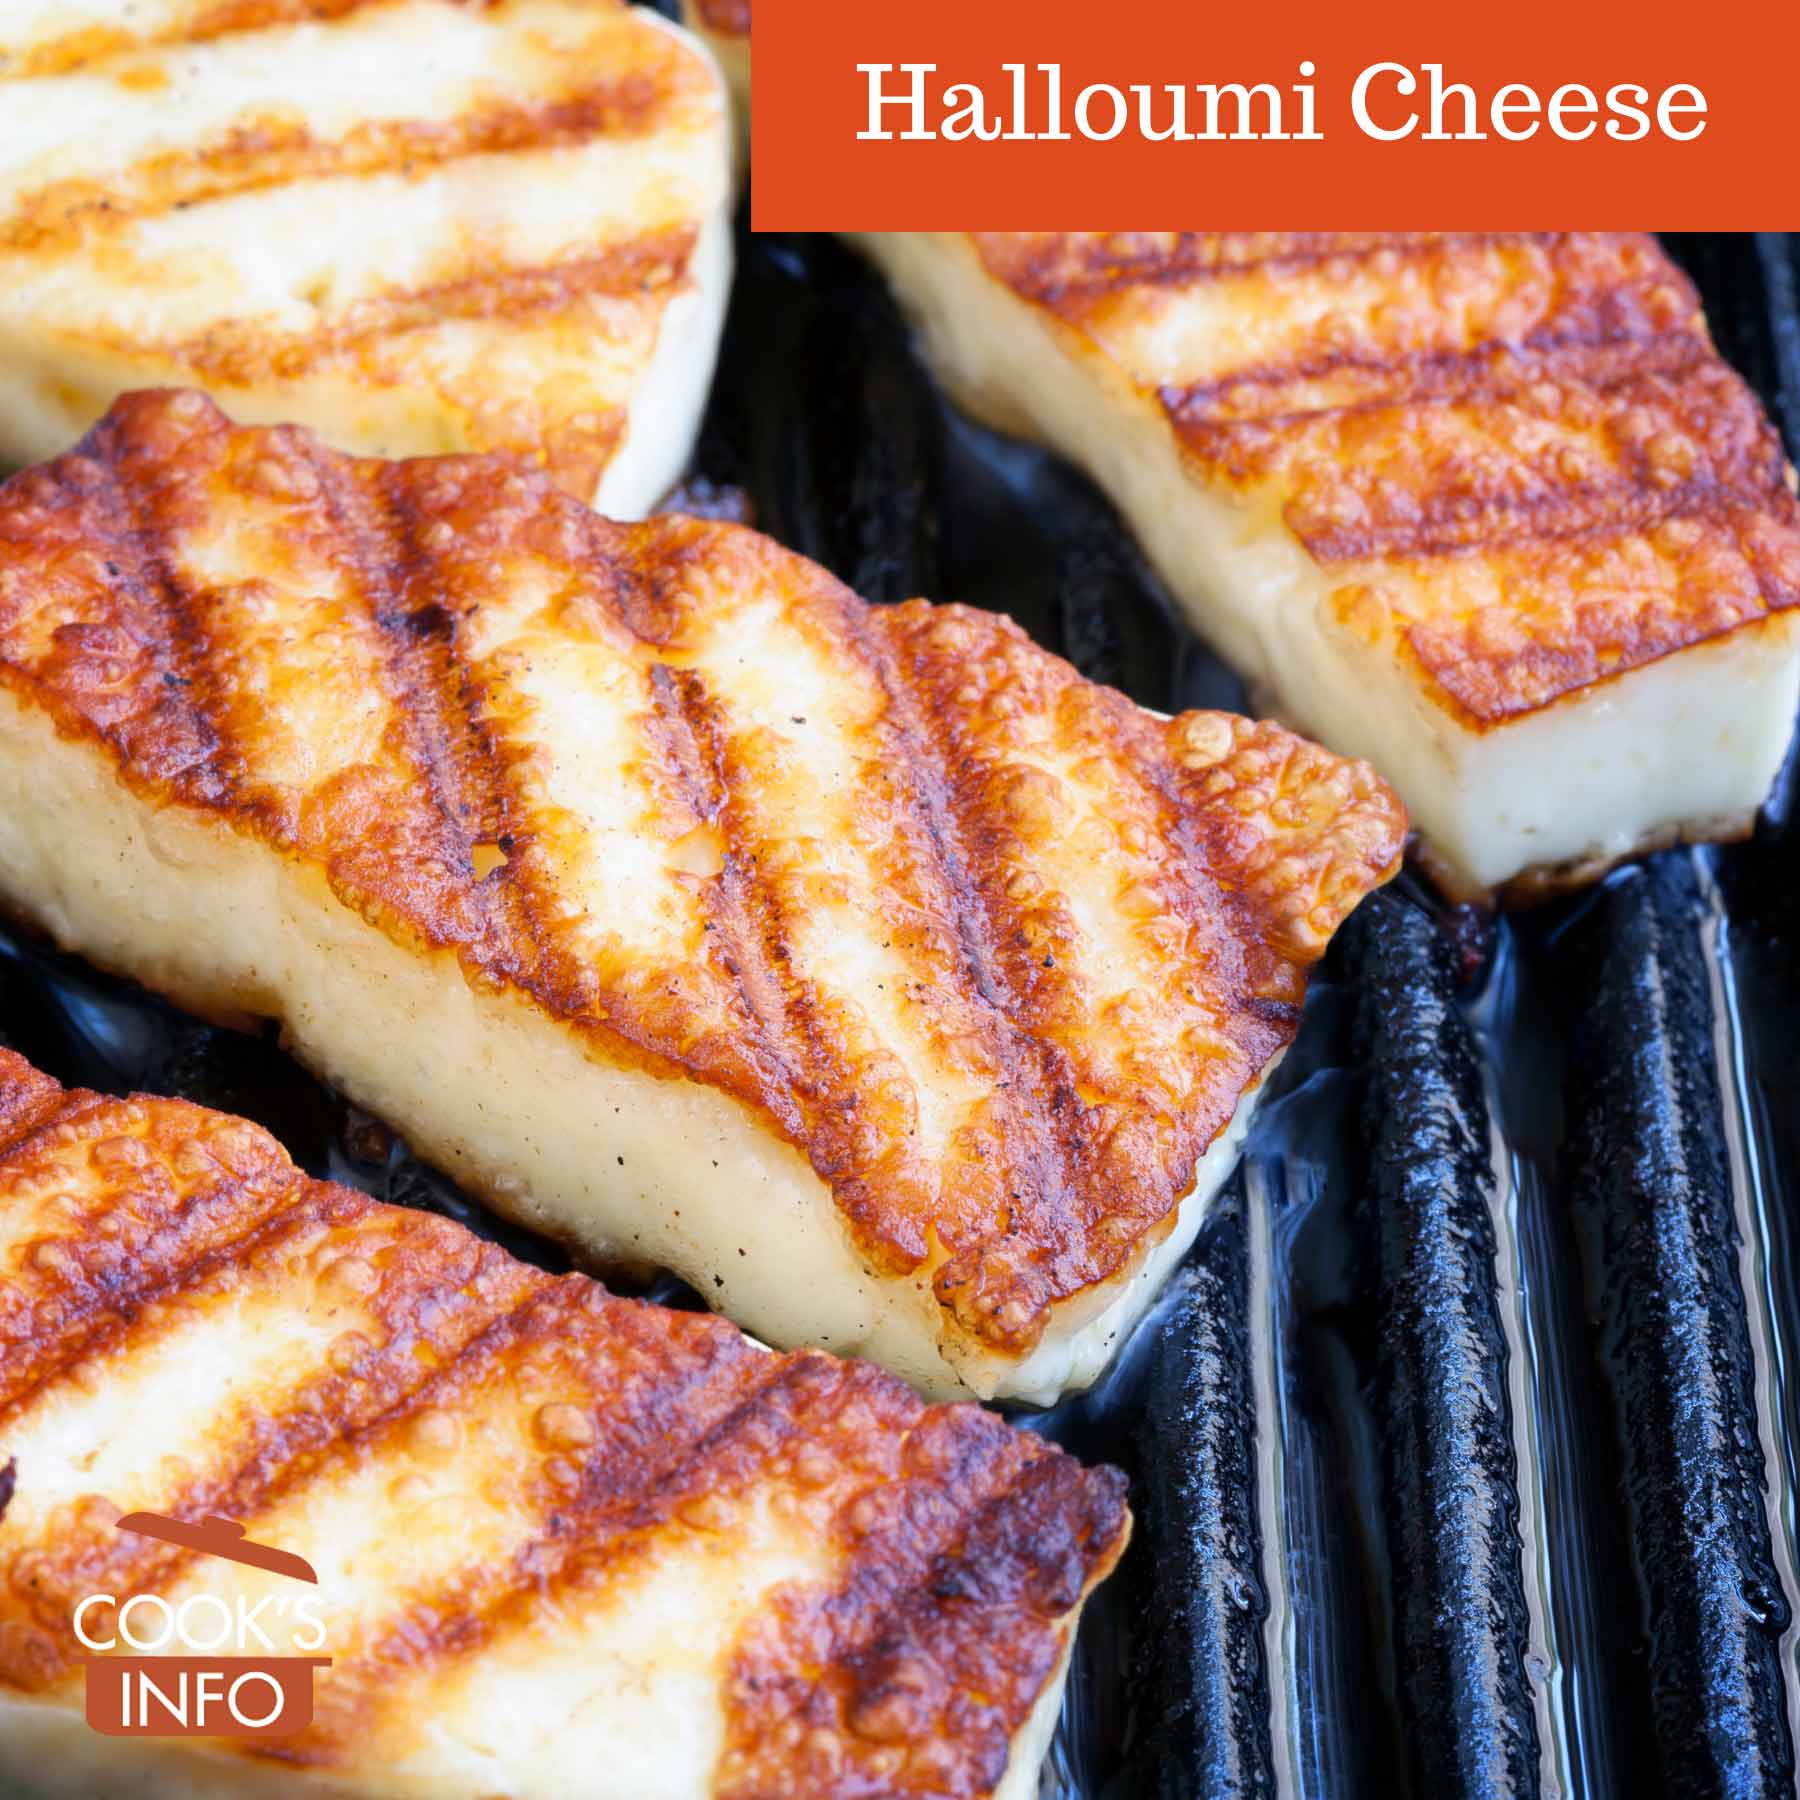 Grilled halloumi cheese slices